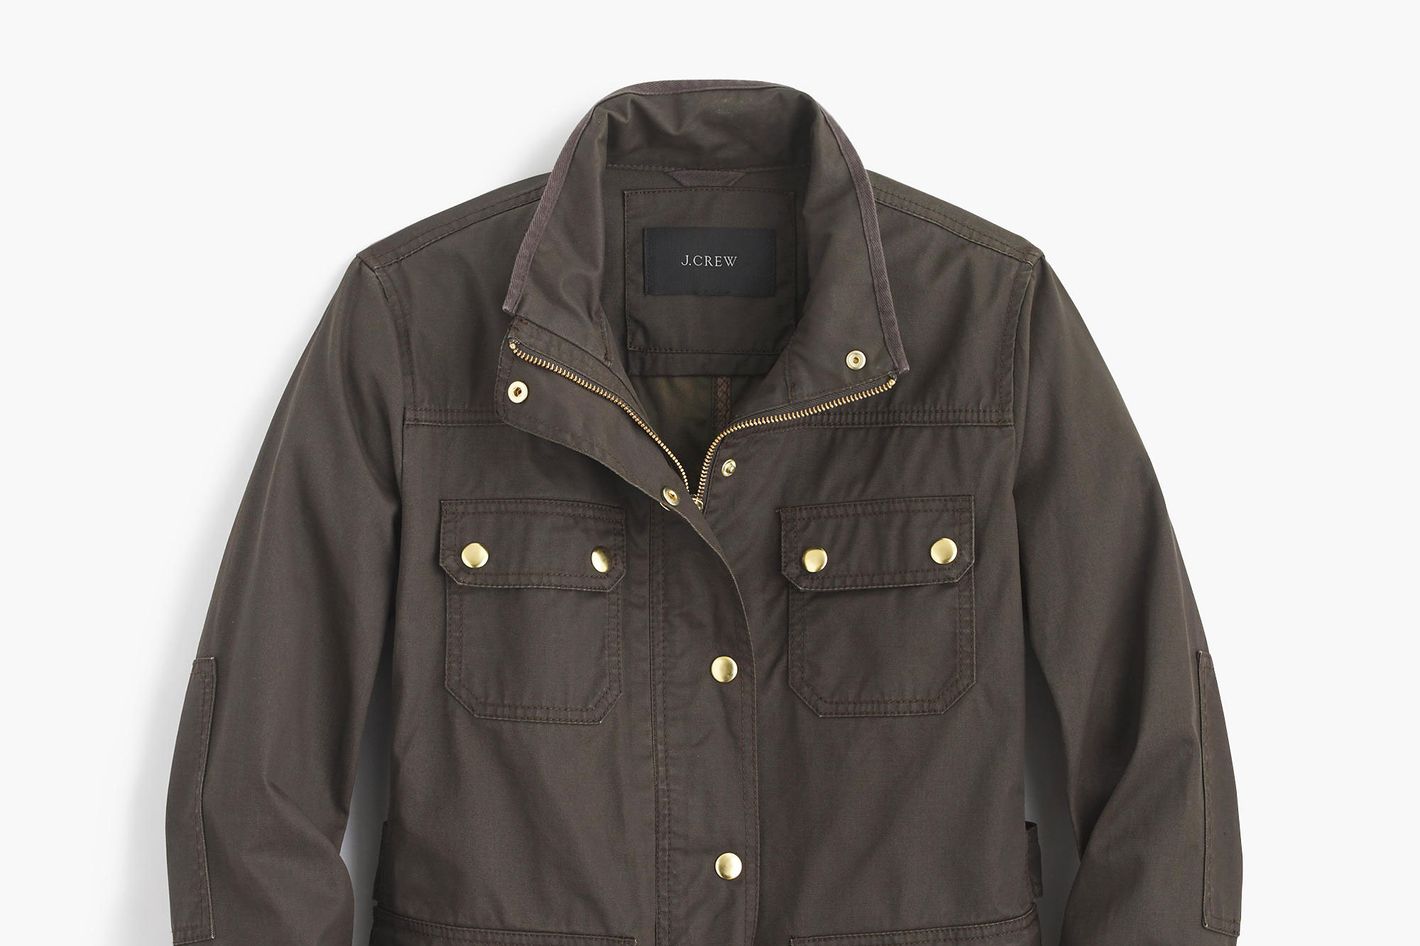 Everyone Owns the J.Crew Field Jacket